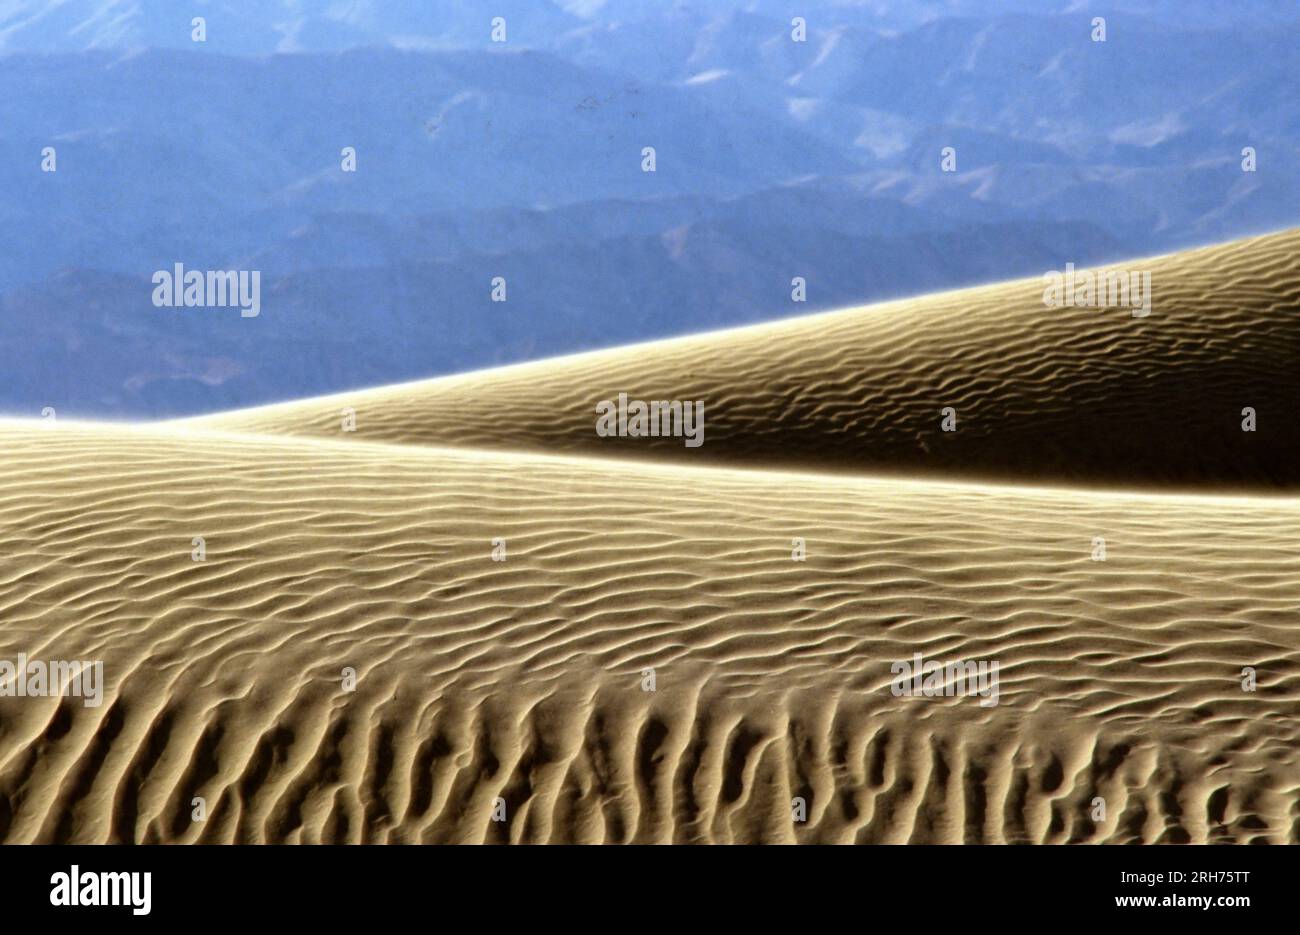 Sand dune textures at the Mesquite Dunes, Death Valley National Park, California, USA Stock Photo